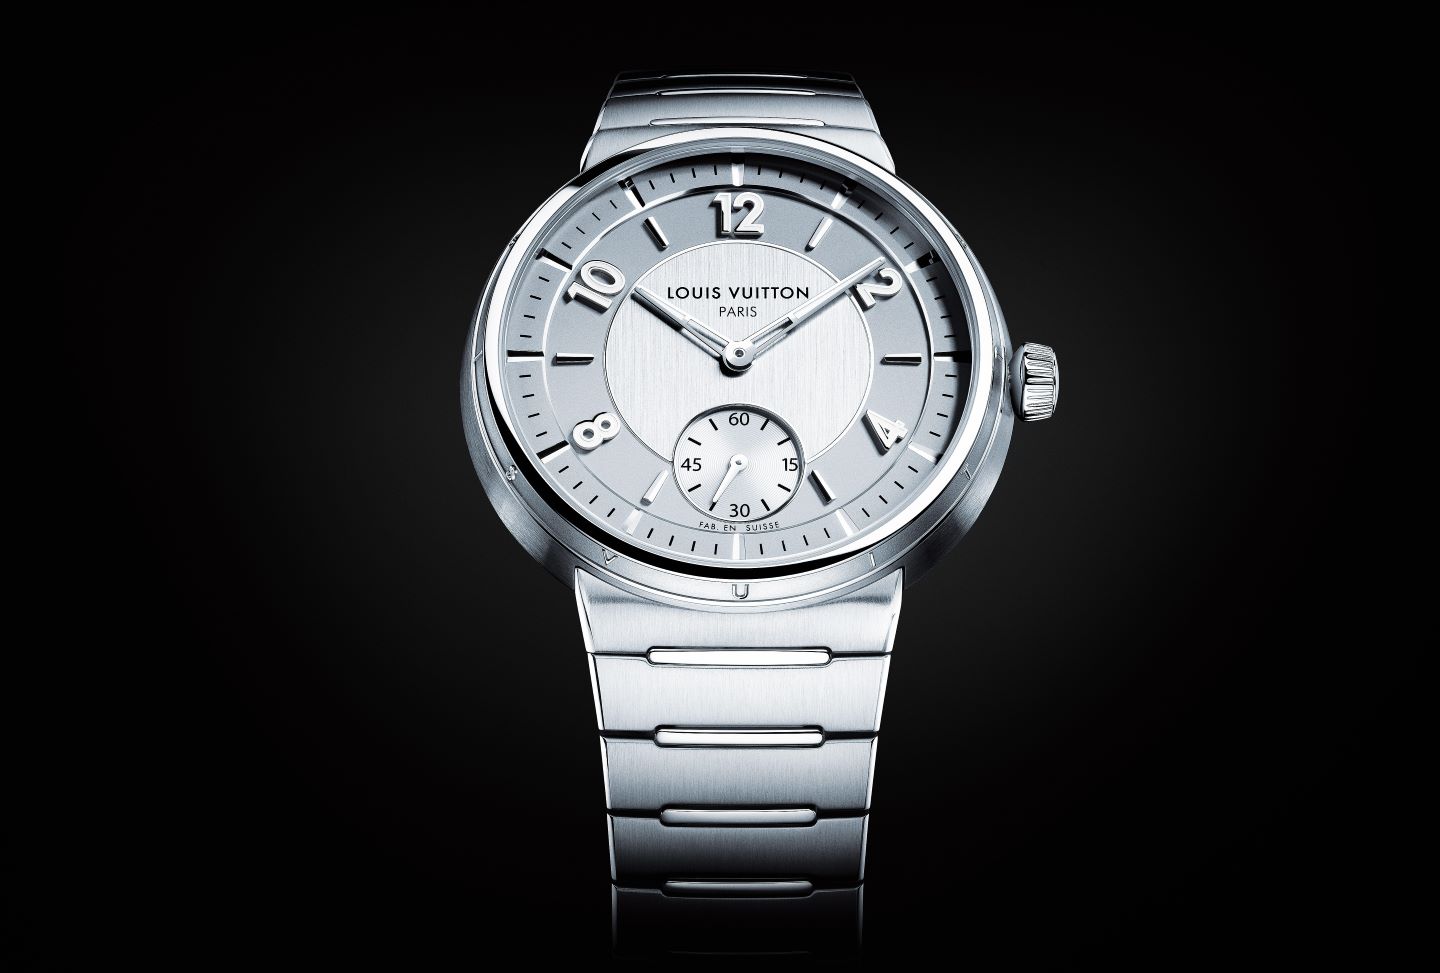 Louis Vuitton presents its newest Tambour Moon watch, the Tambour